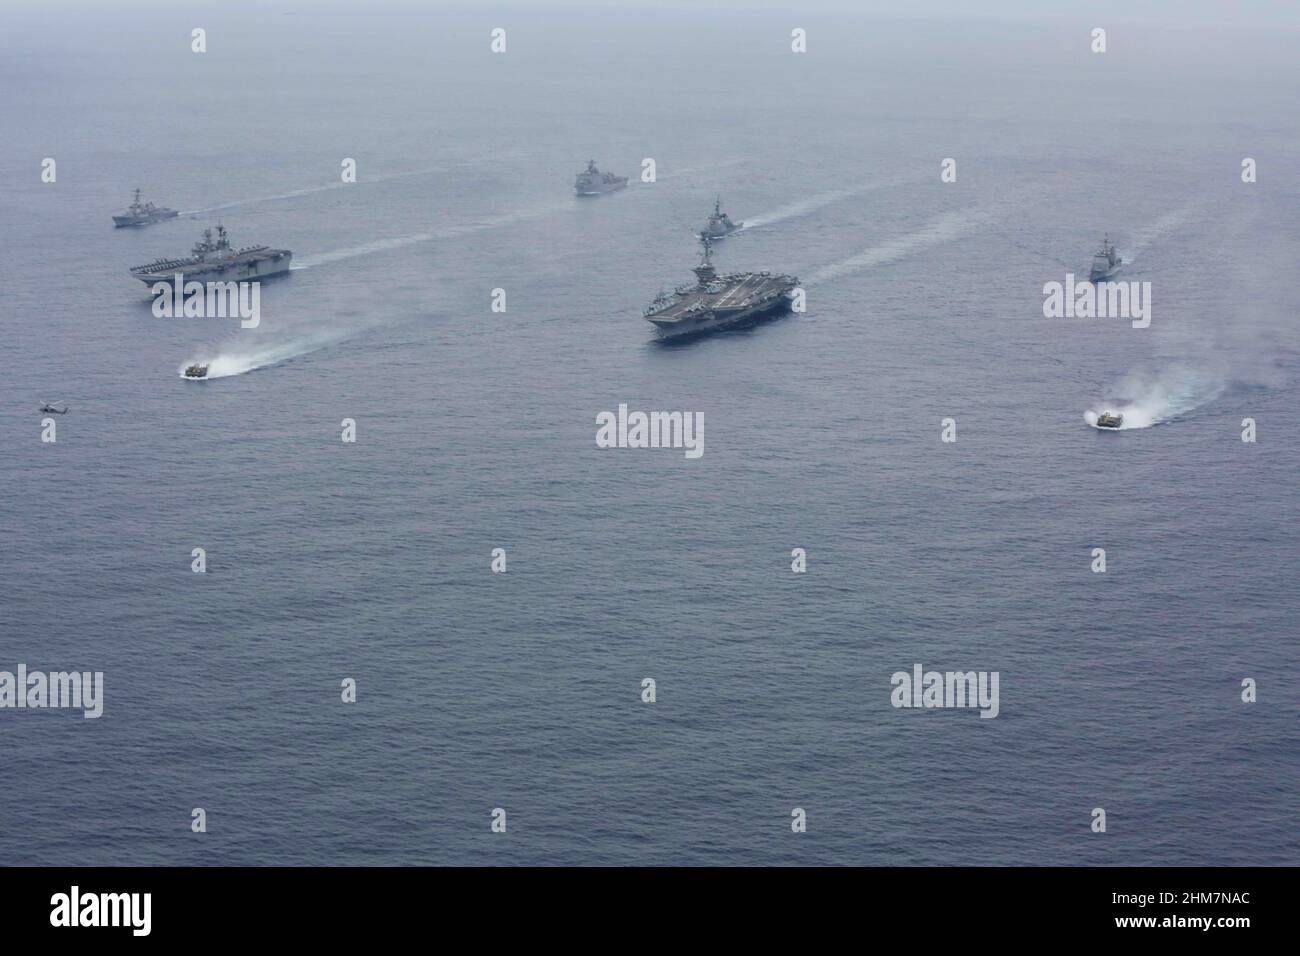 PHILIPPINE SEA (Feb. 7, 2022) Ships of the America and Essex Amphibious Ready Groups, and Abraham Lincoln Carrier Strike Group, sail in formation with the Japan Maritime Self-Defense Force during exercise Noble Fusion. Front row: Landing craft, air cushion from the USS Essex (LHD 2). Second row, left to right: USS America (LHA 6), USS Abraham Lincoln (CVN 72) Third row, left to right: USS Dewey (DDG 105), JS Kongō (DDG 173), USS Mobile Bay (CG 53). Back row: USS Ashland (LSD 48). Ships of the America and Essex Amphibious Ready Groups and the Abraham Lincoln Carrier Strike Group, alongside the Stock Photo